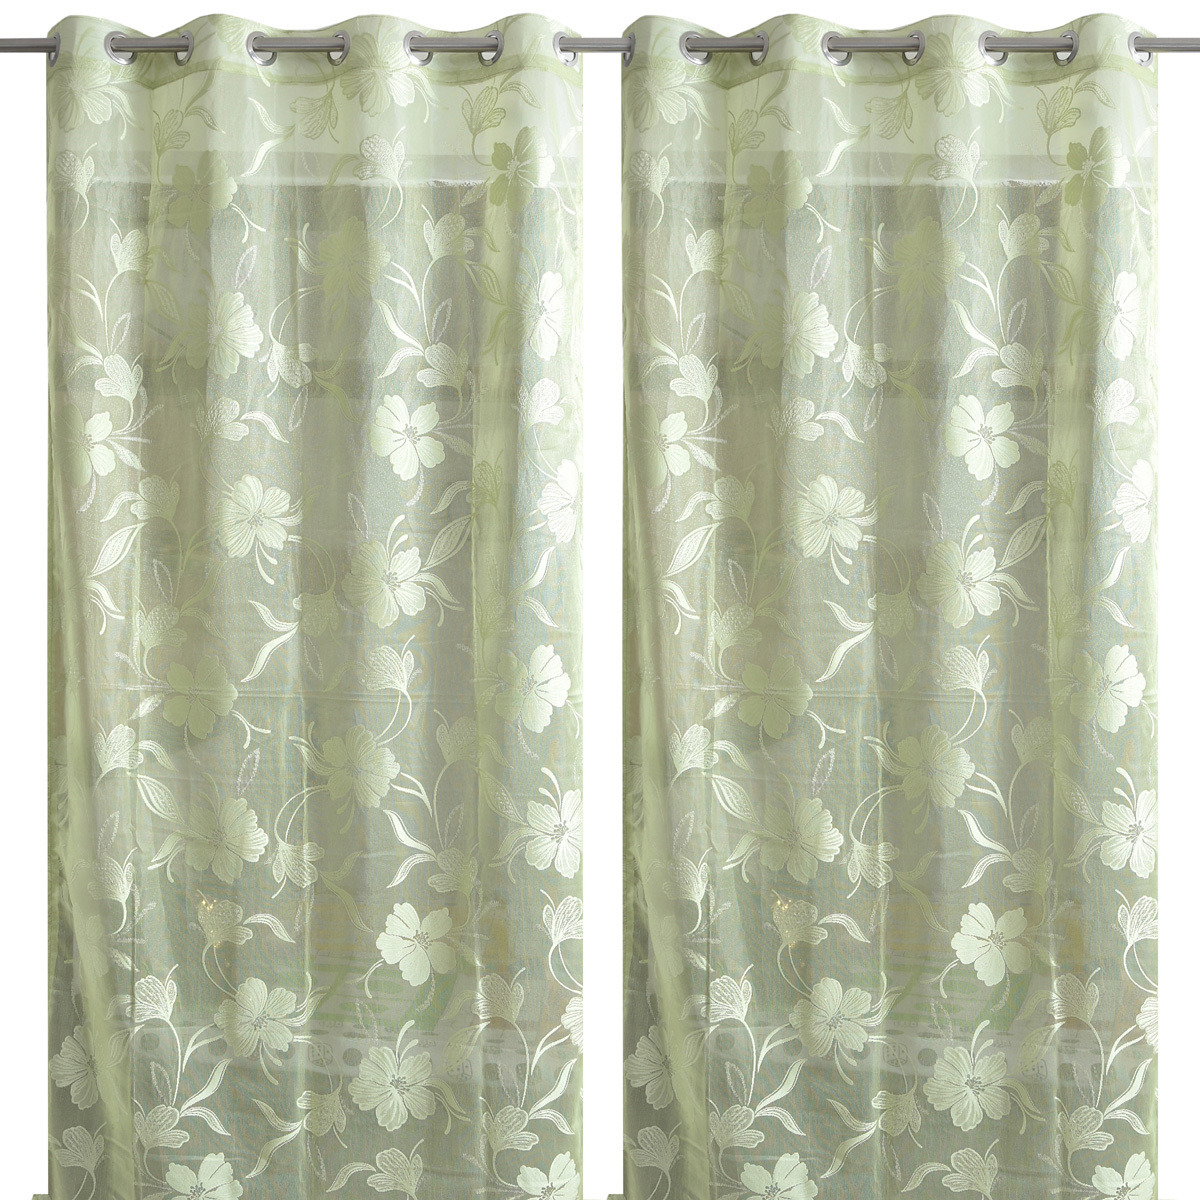 HANDTEX HOME Sheer Net Green Curtains With Beautiful Embroidered Floral Designs for Door 4ft x 9ft Set of 2 SP01